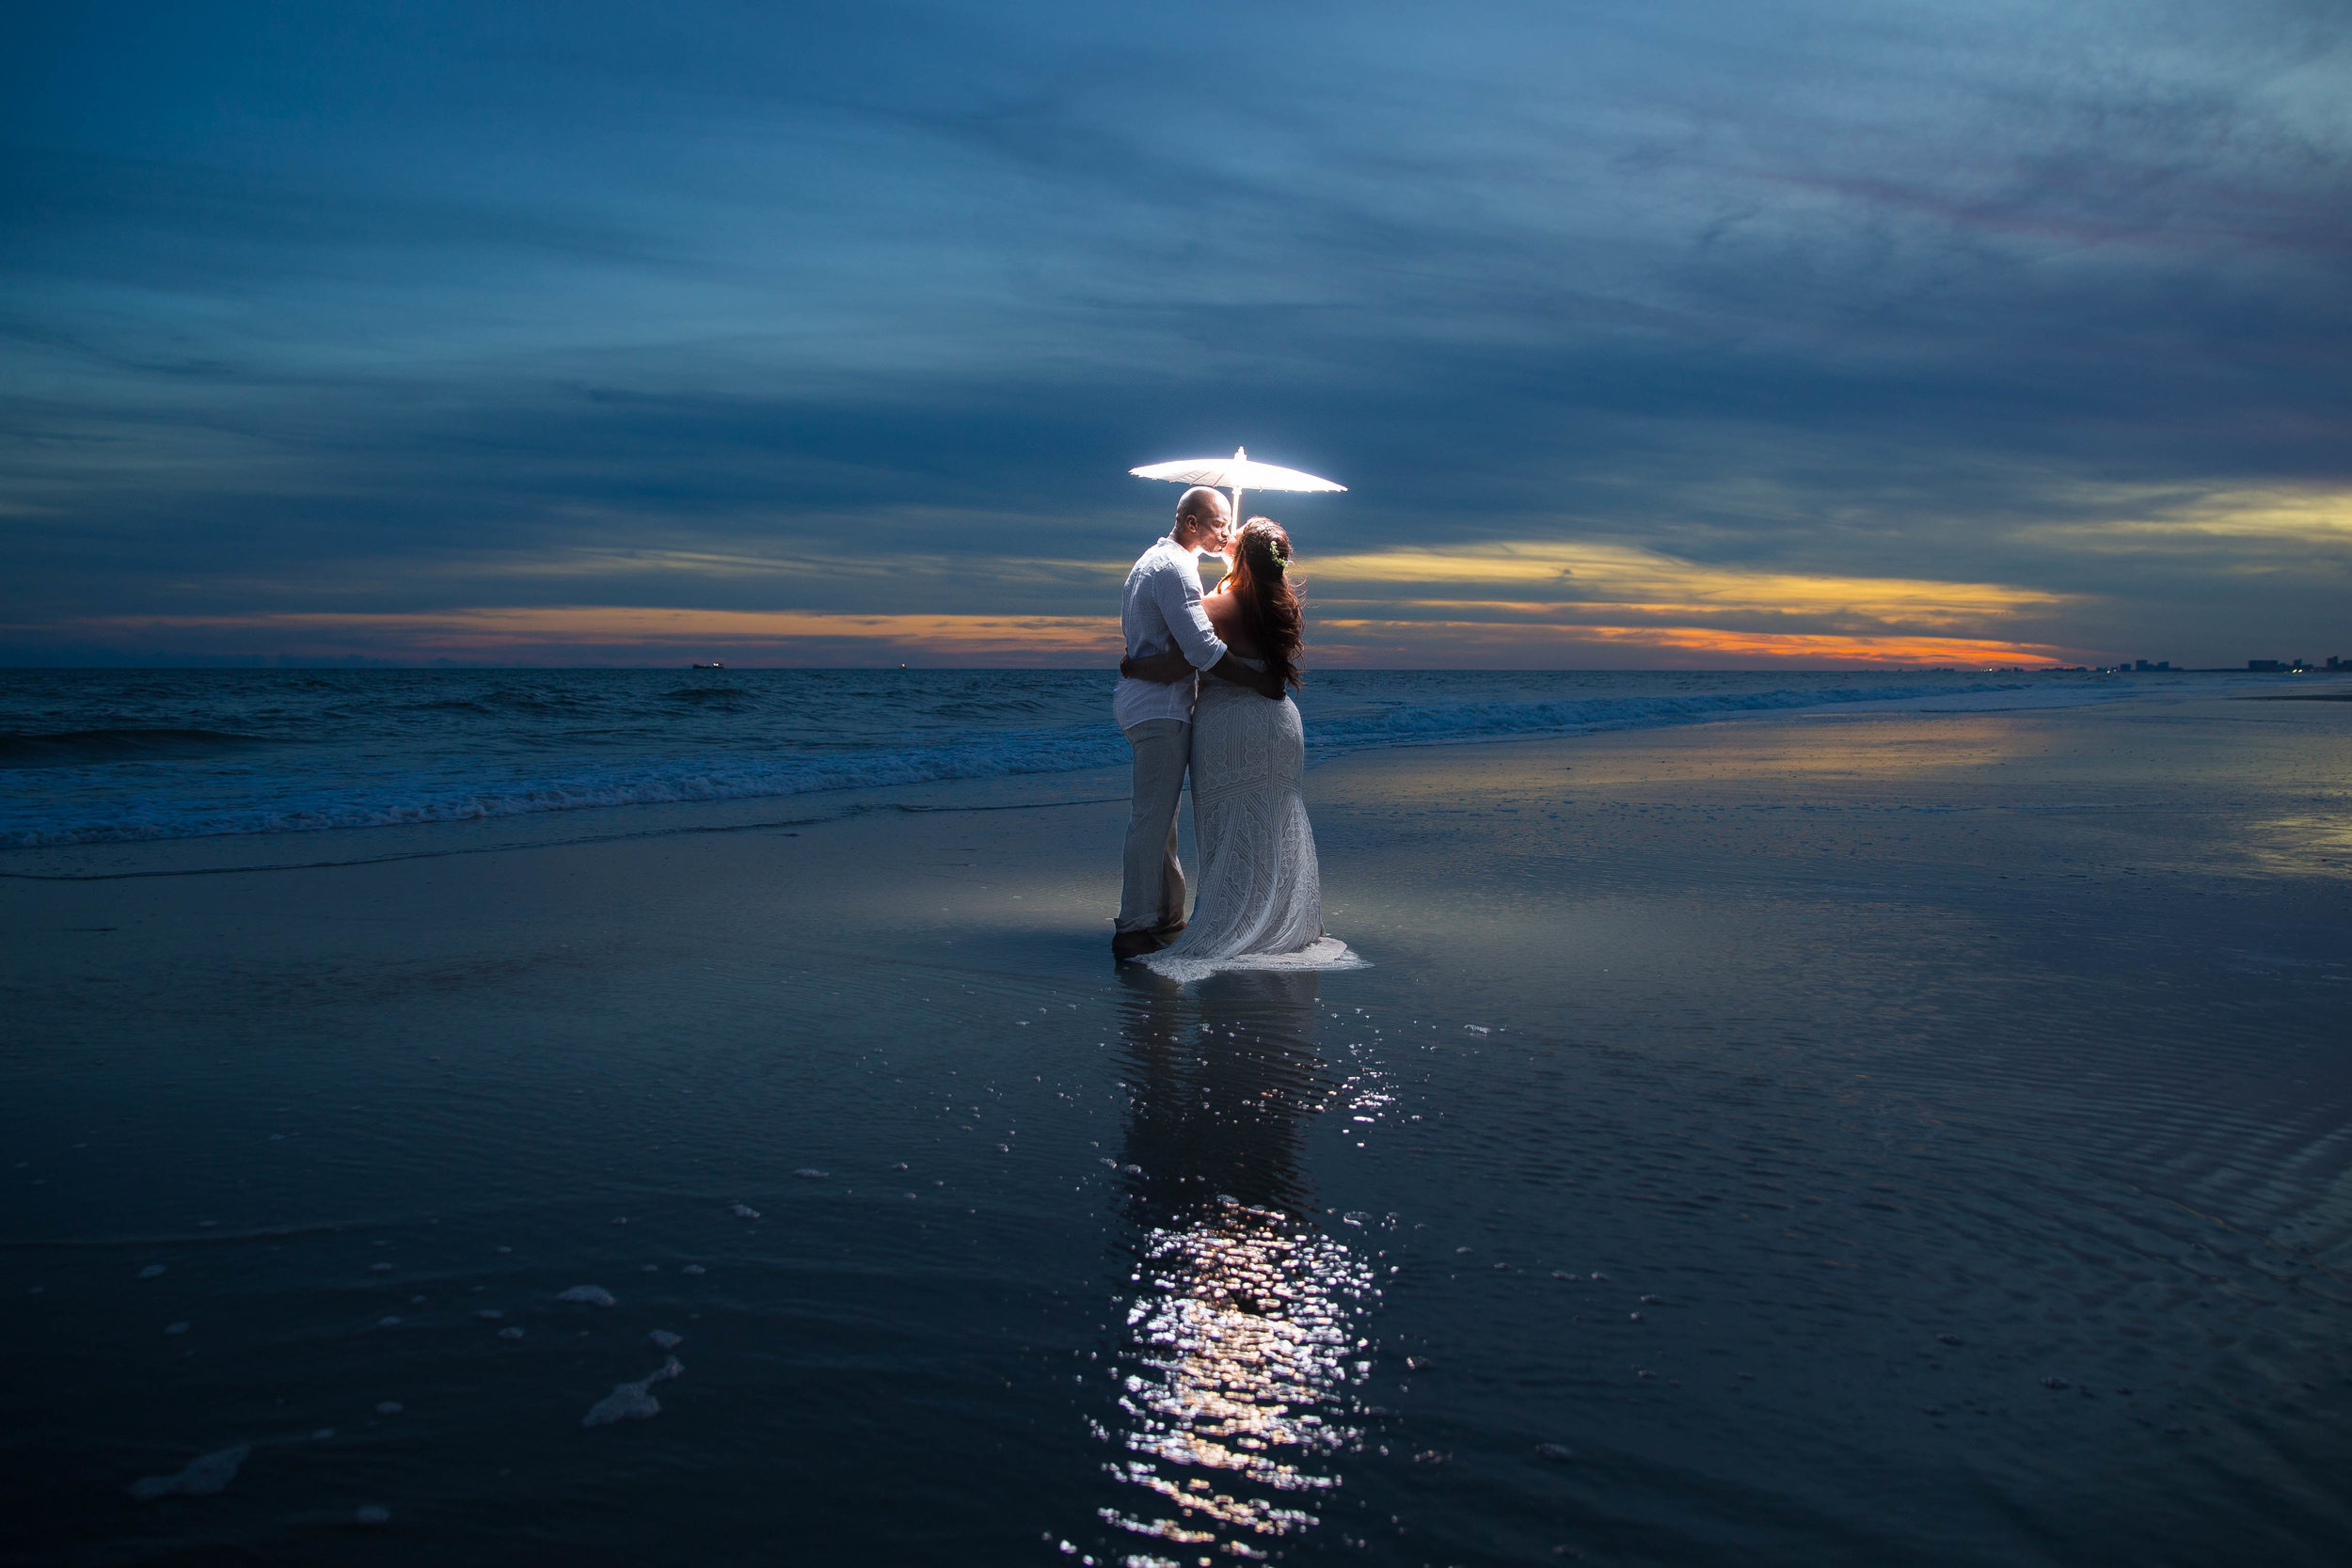  Couple kisses on a beach during sunset with an illuminated umbrella. 